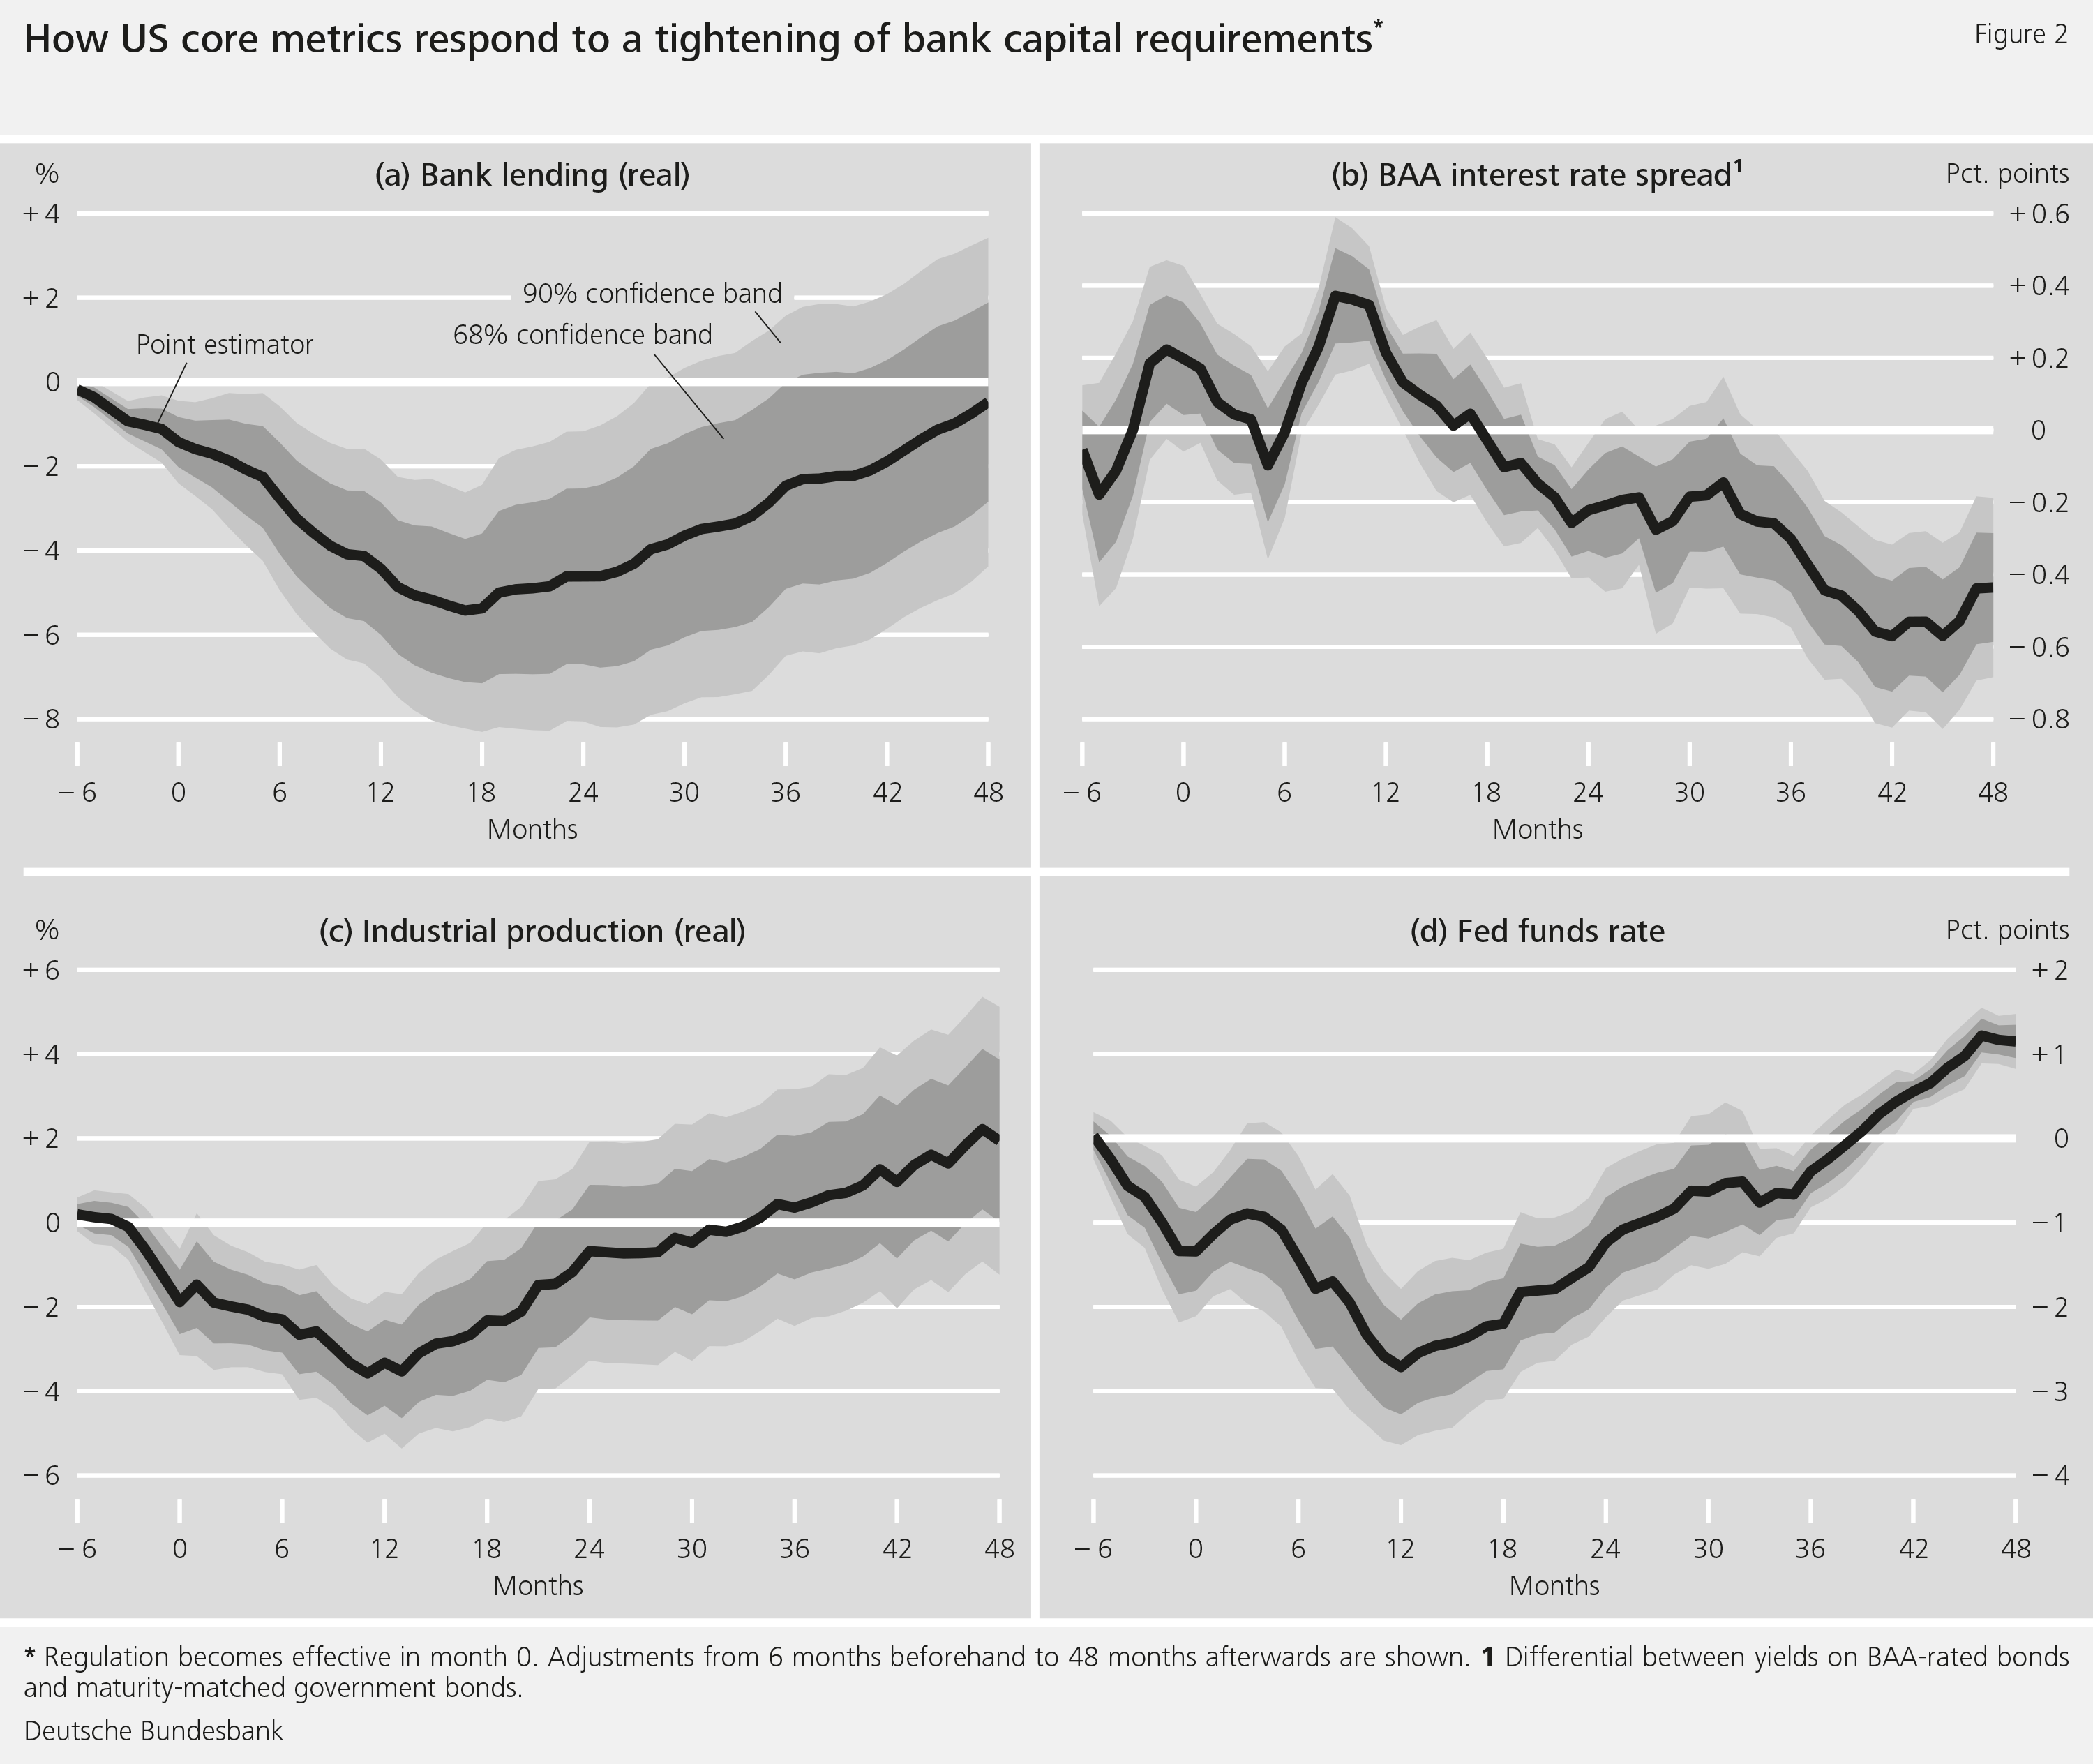 Figure 2: How US core metrics respond to a tightening of bank capital requirements